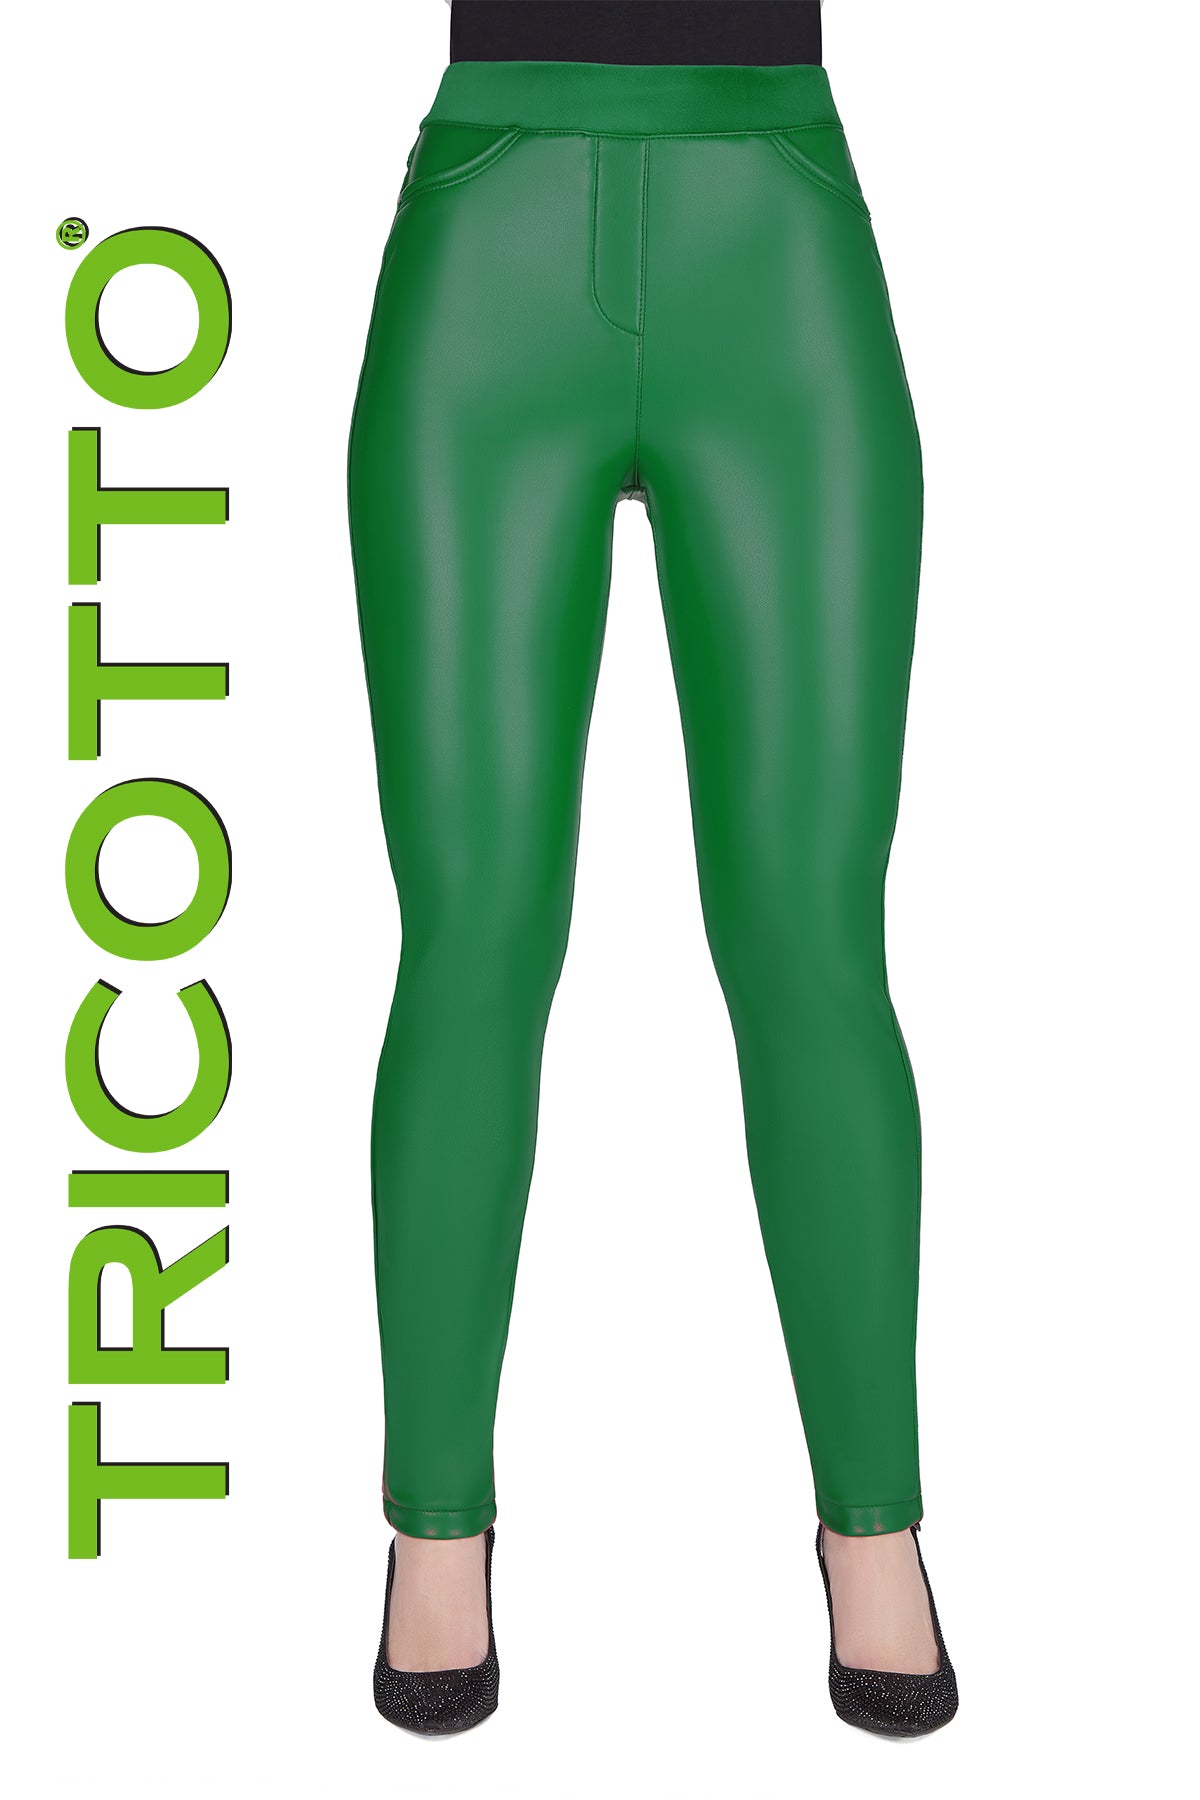 Tricotto Green Pant-Tricotto Vegan Leather Pants-Buy Tricotto Pants Online-Leather Pants Online Canada-Tricotto Clothing Montreal